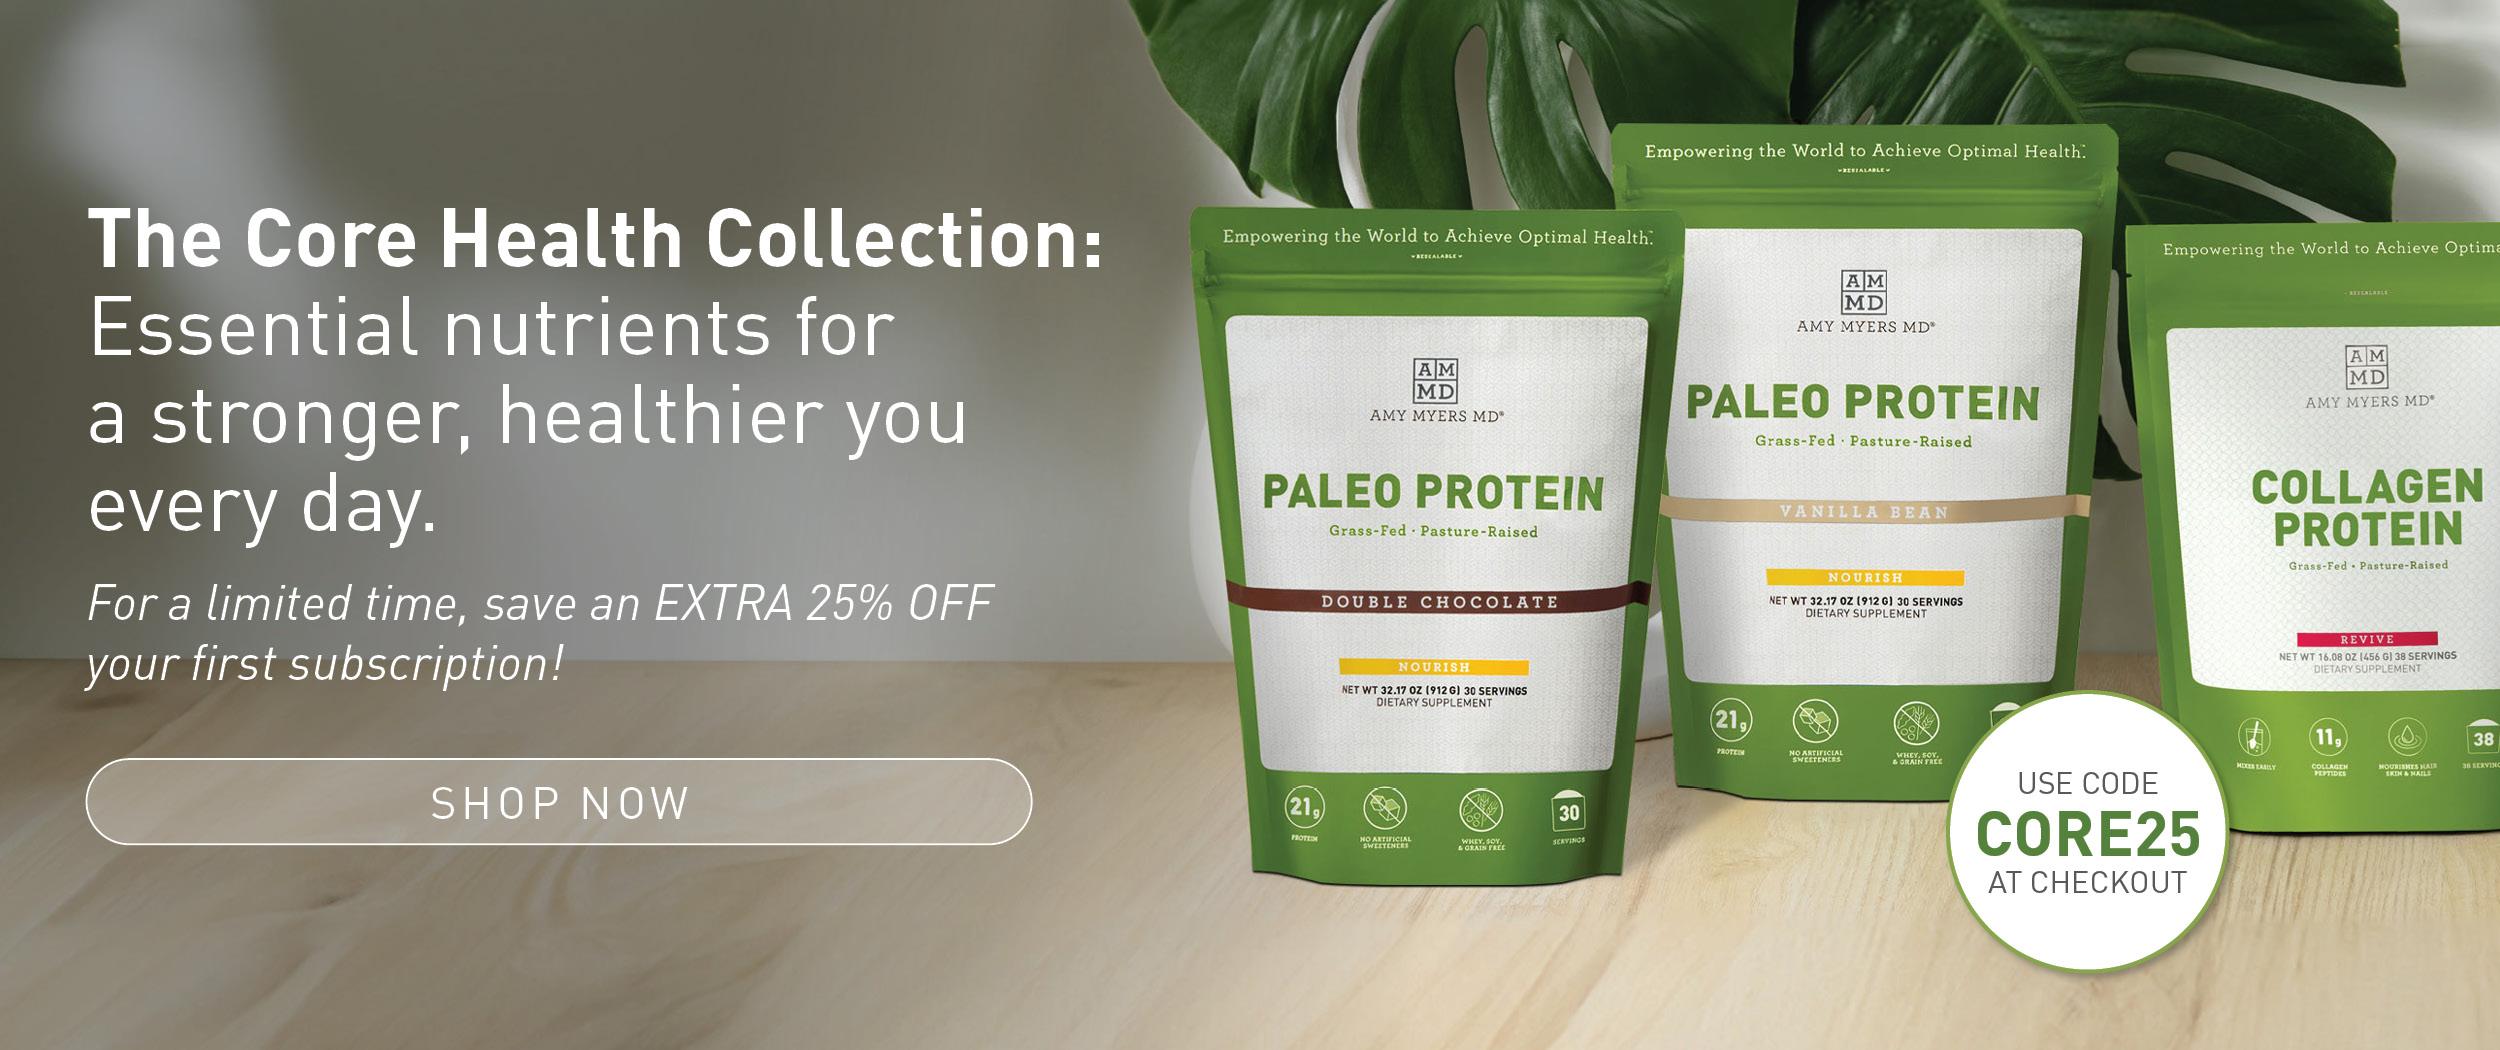 The Core Health Collection: Essential nutrients for a stronger, healthier you every day. For a limited time save 25% when you use code: CORE25. Learn More.